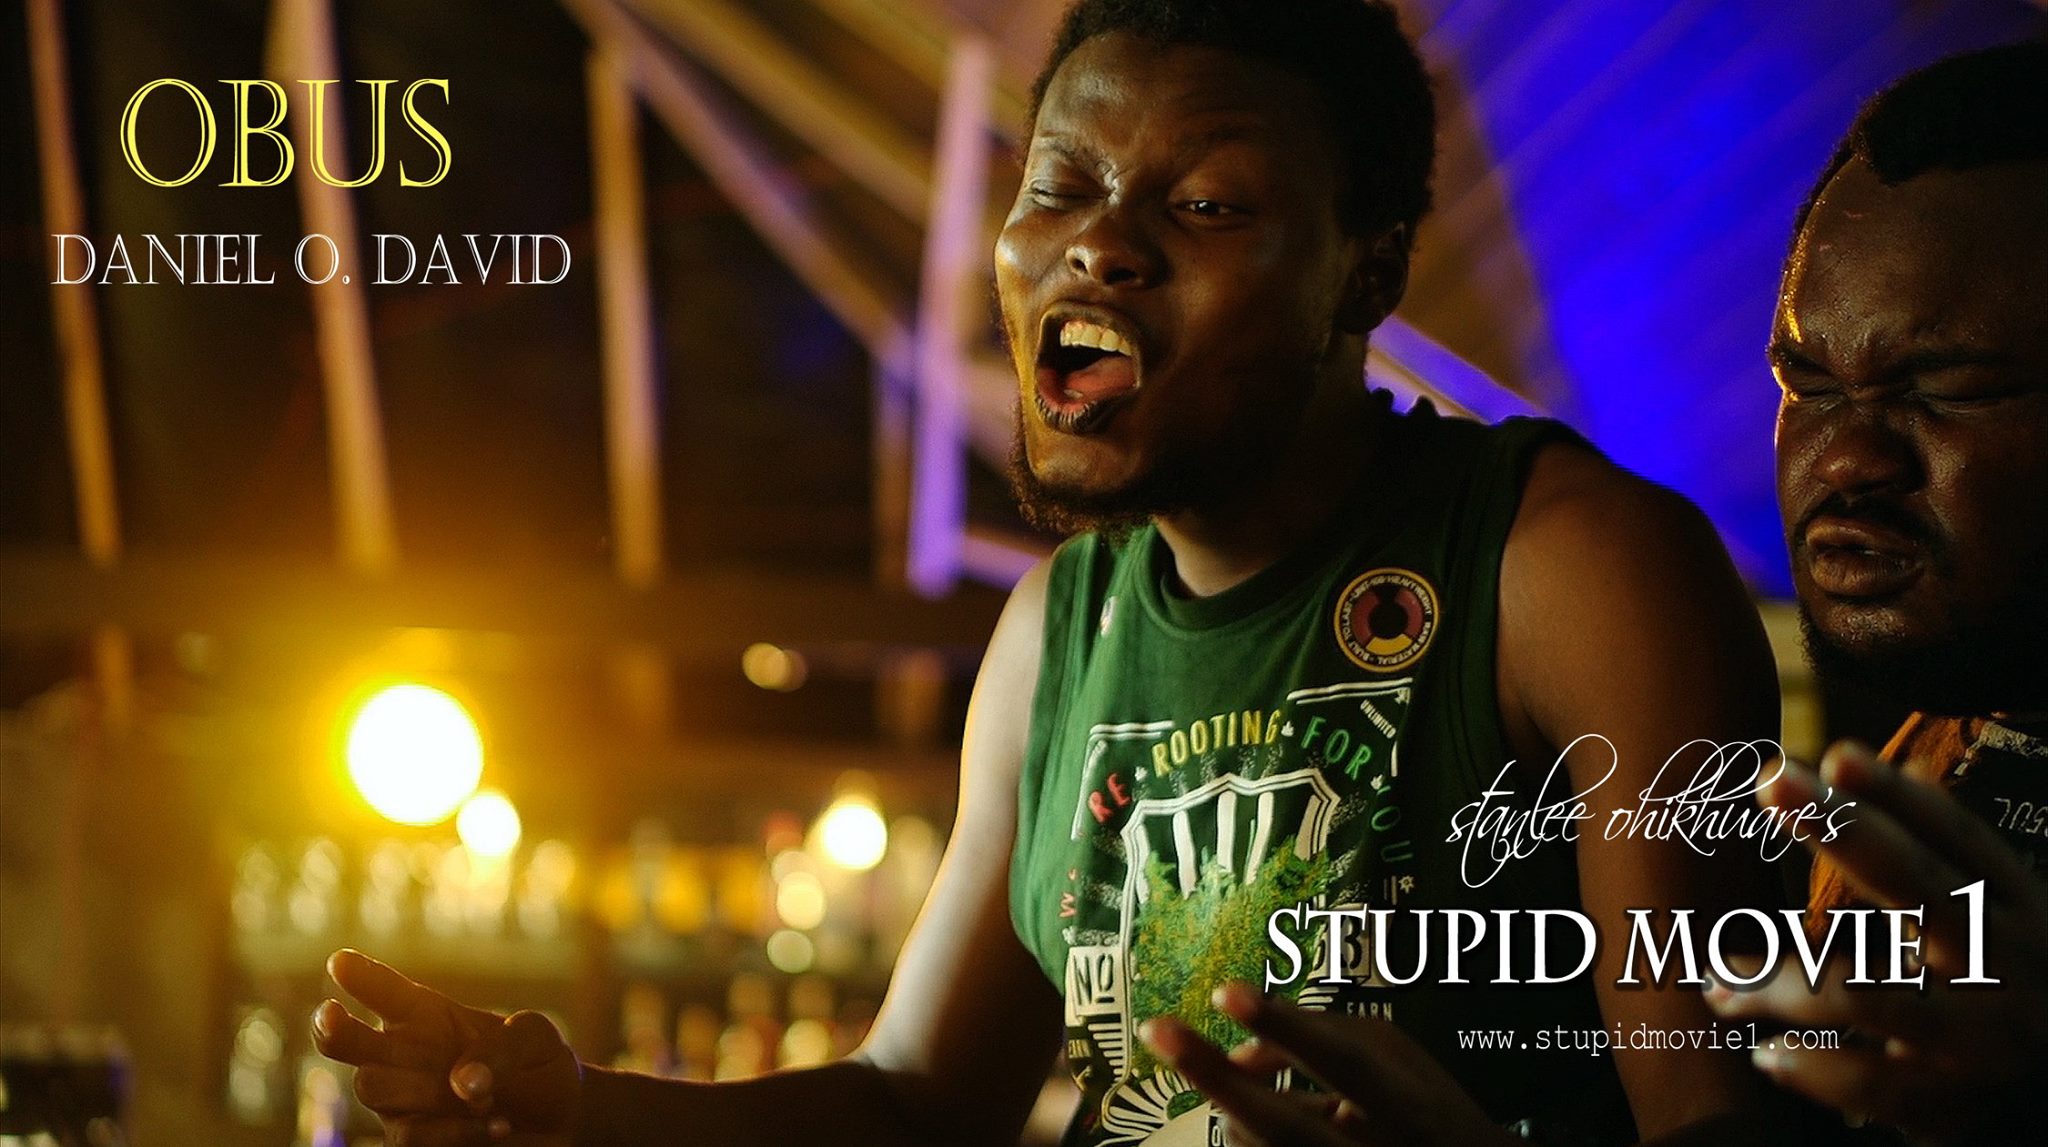 CHARACTER POSTER (OBUS) for Stanlee Ohikhuare's STUPID MOVIE 1